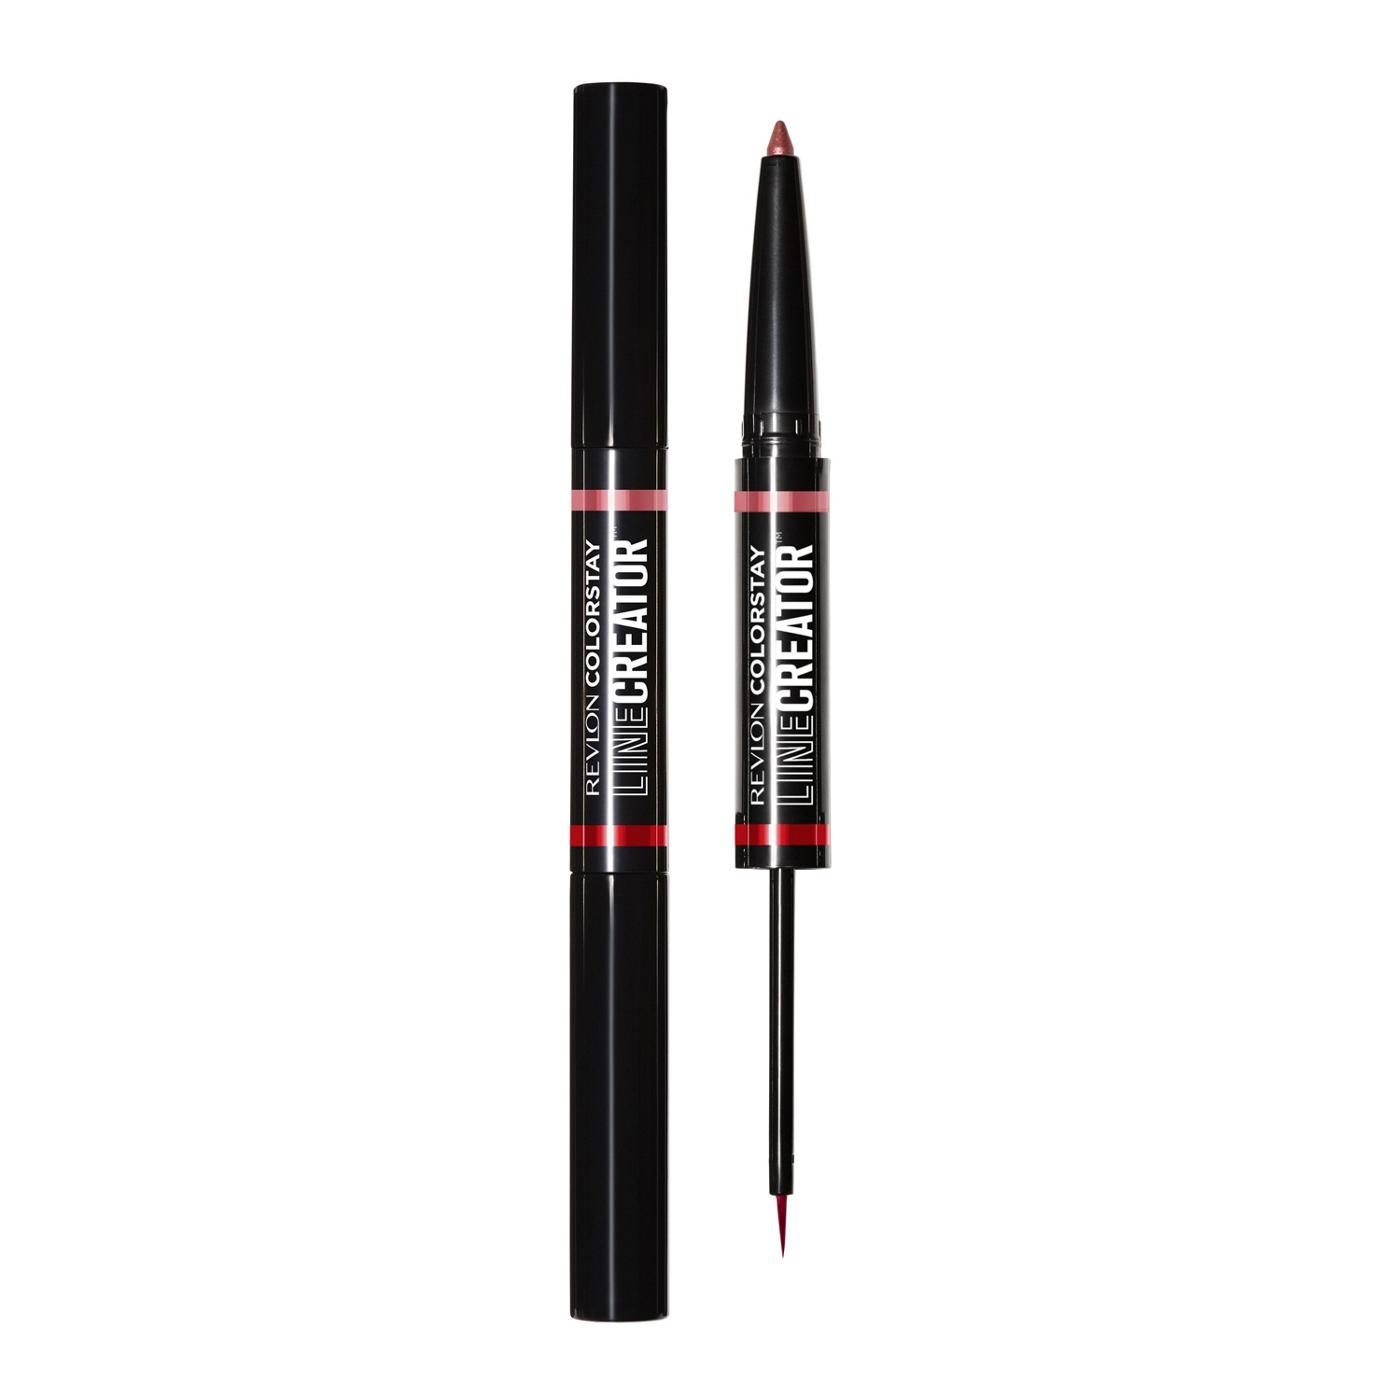 Revlon Colorstay Line Creator Double Ended Liner, She Fire; image 1 of 4